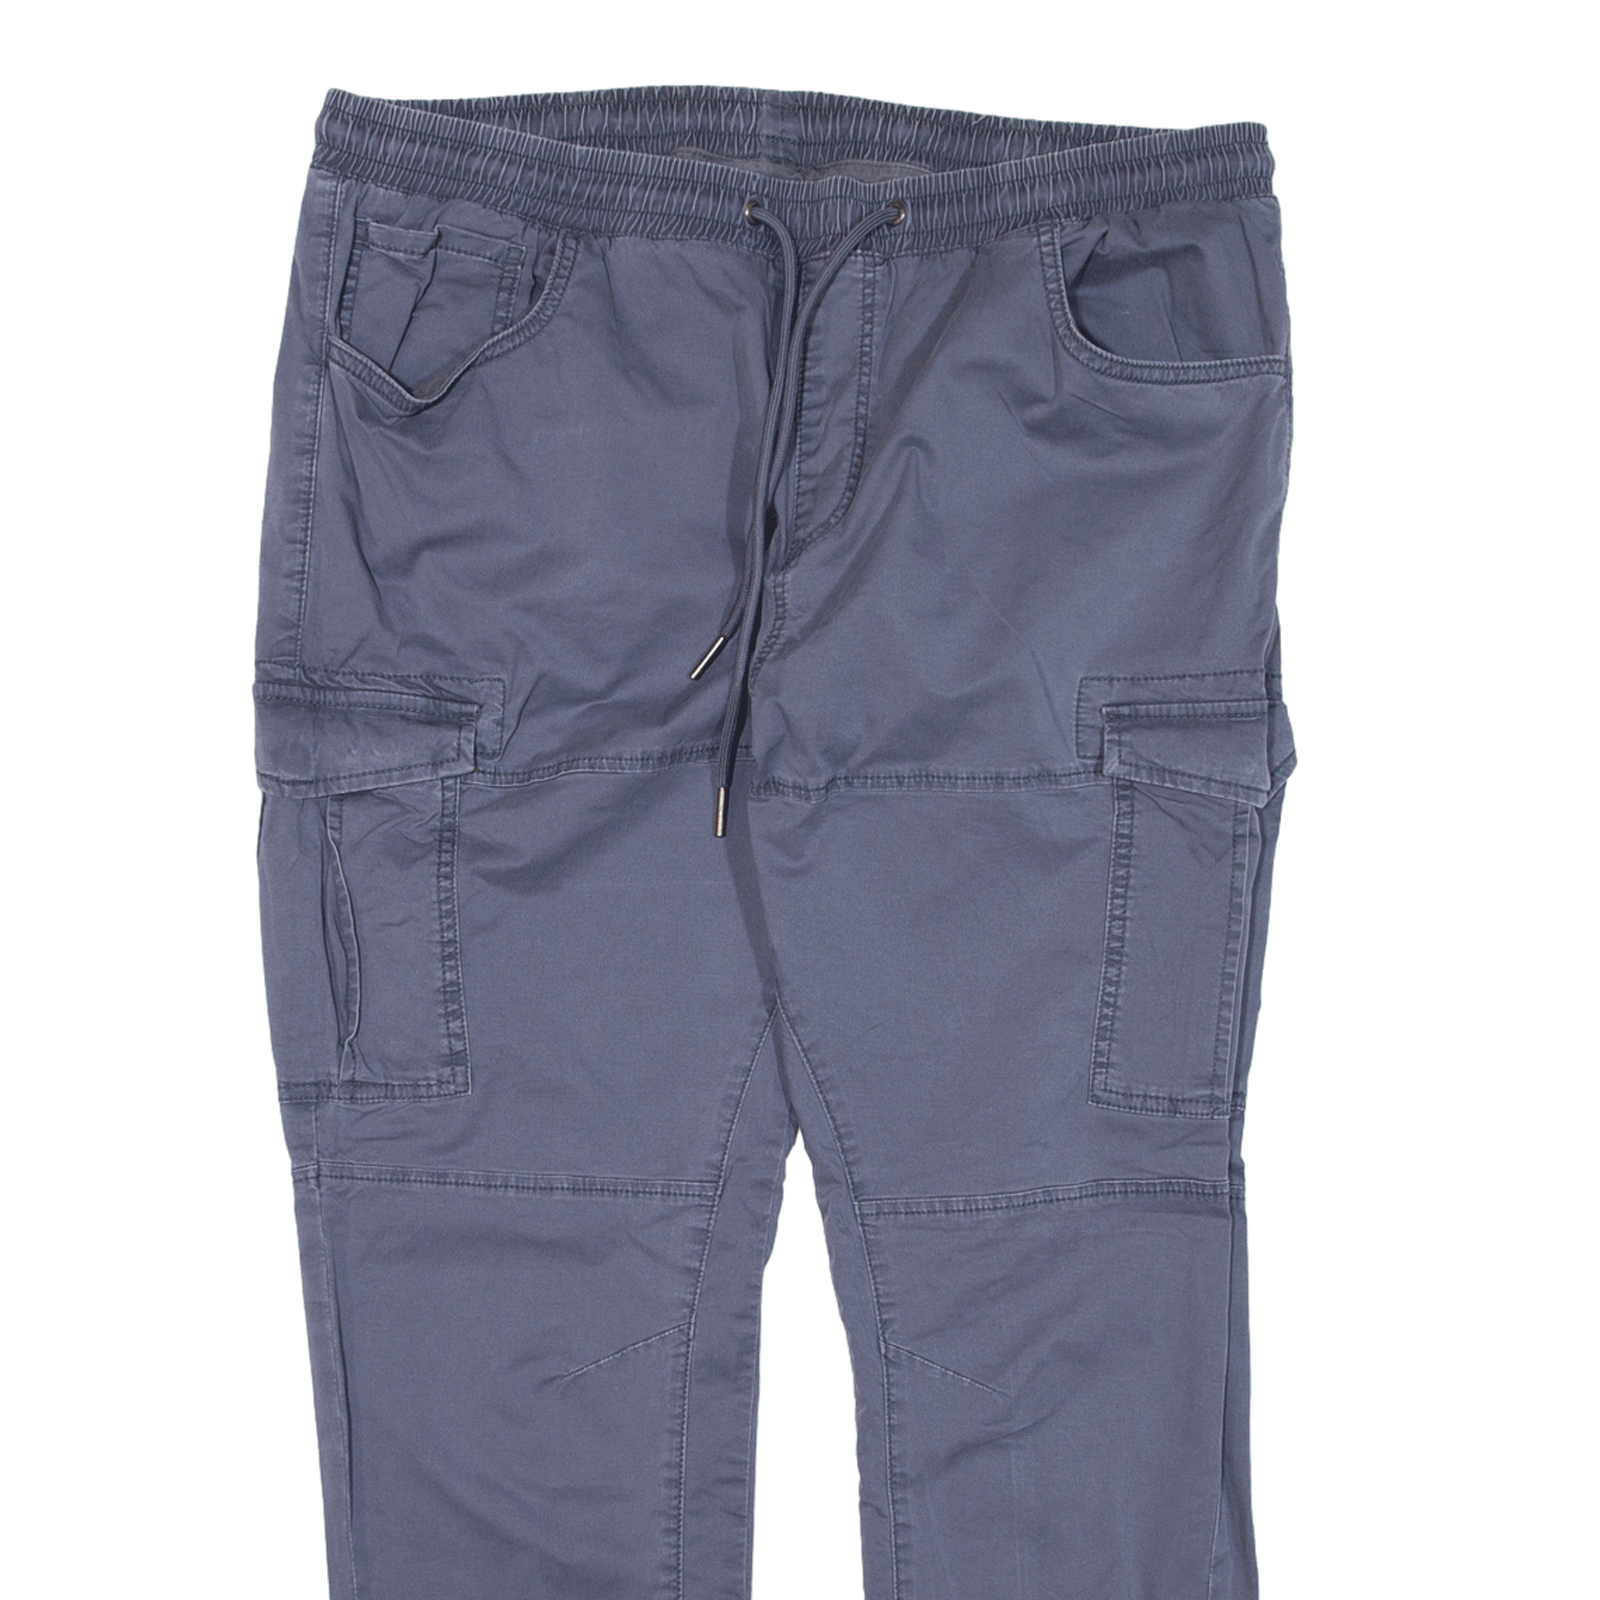 Cargo Pants in cotton for kids | FASHIOLA.com